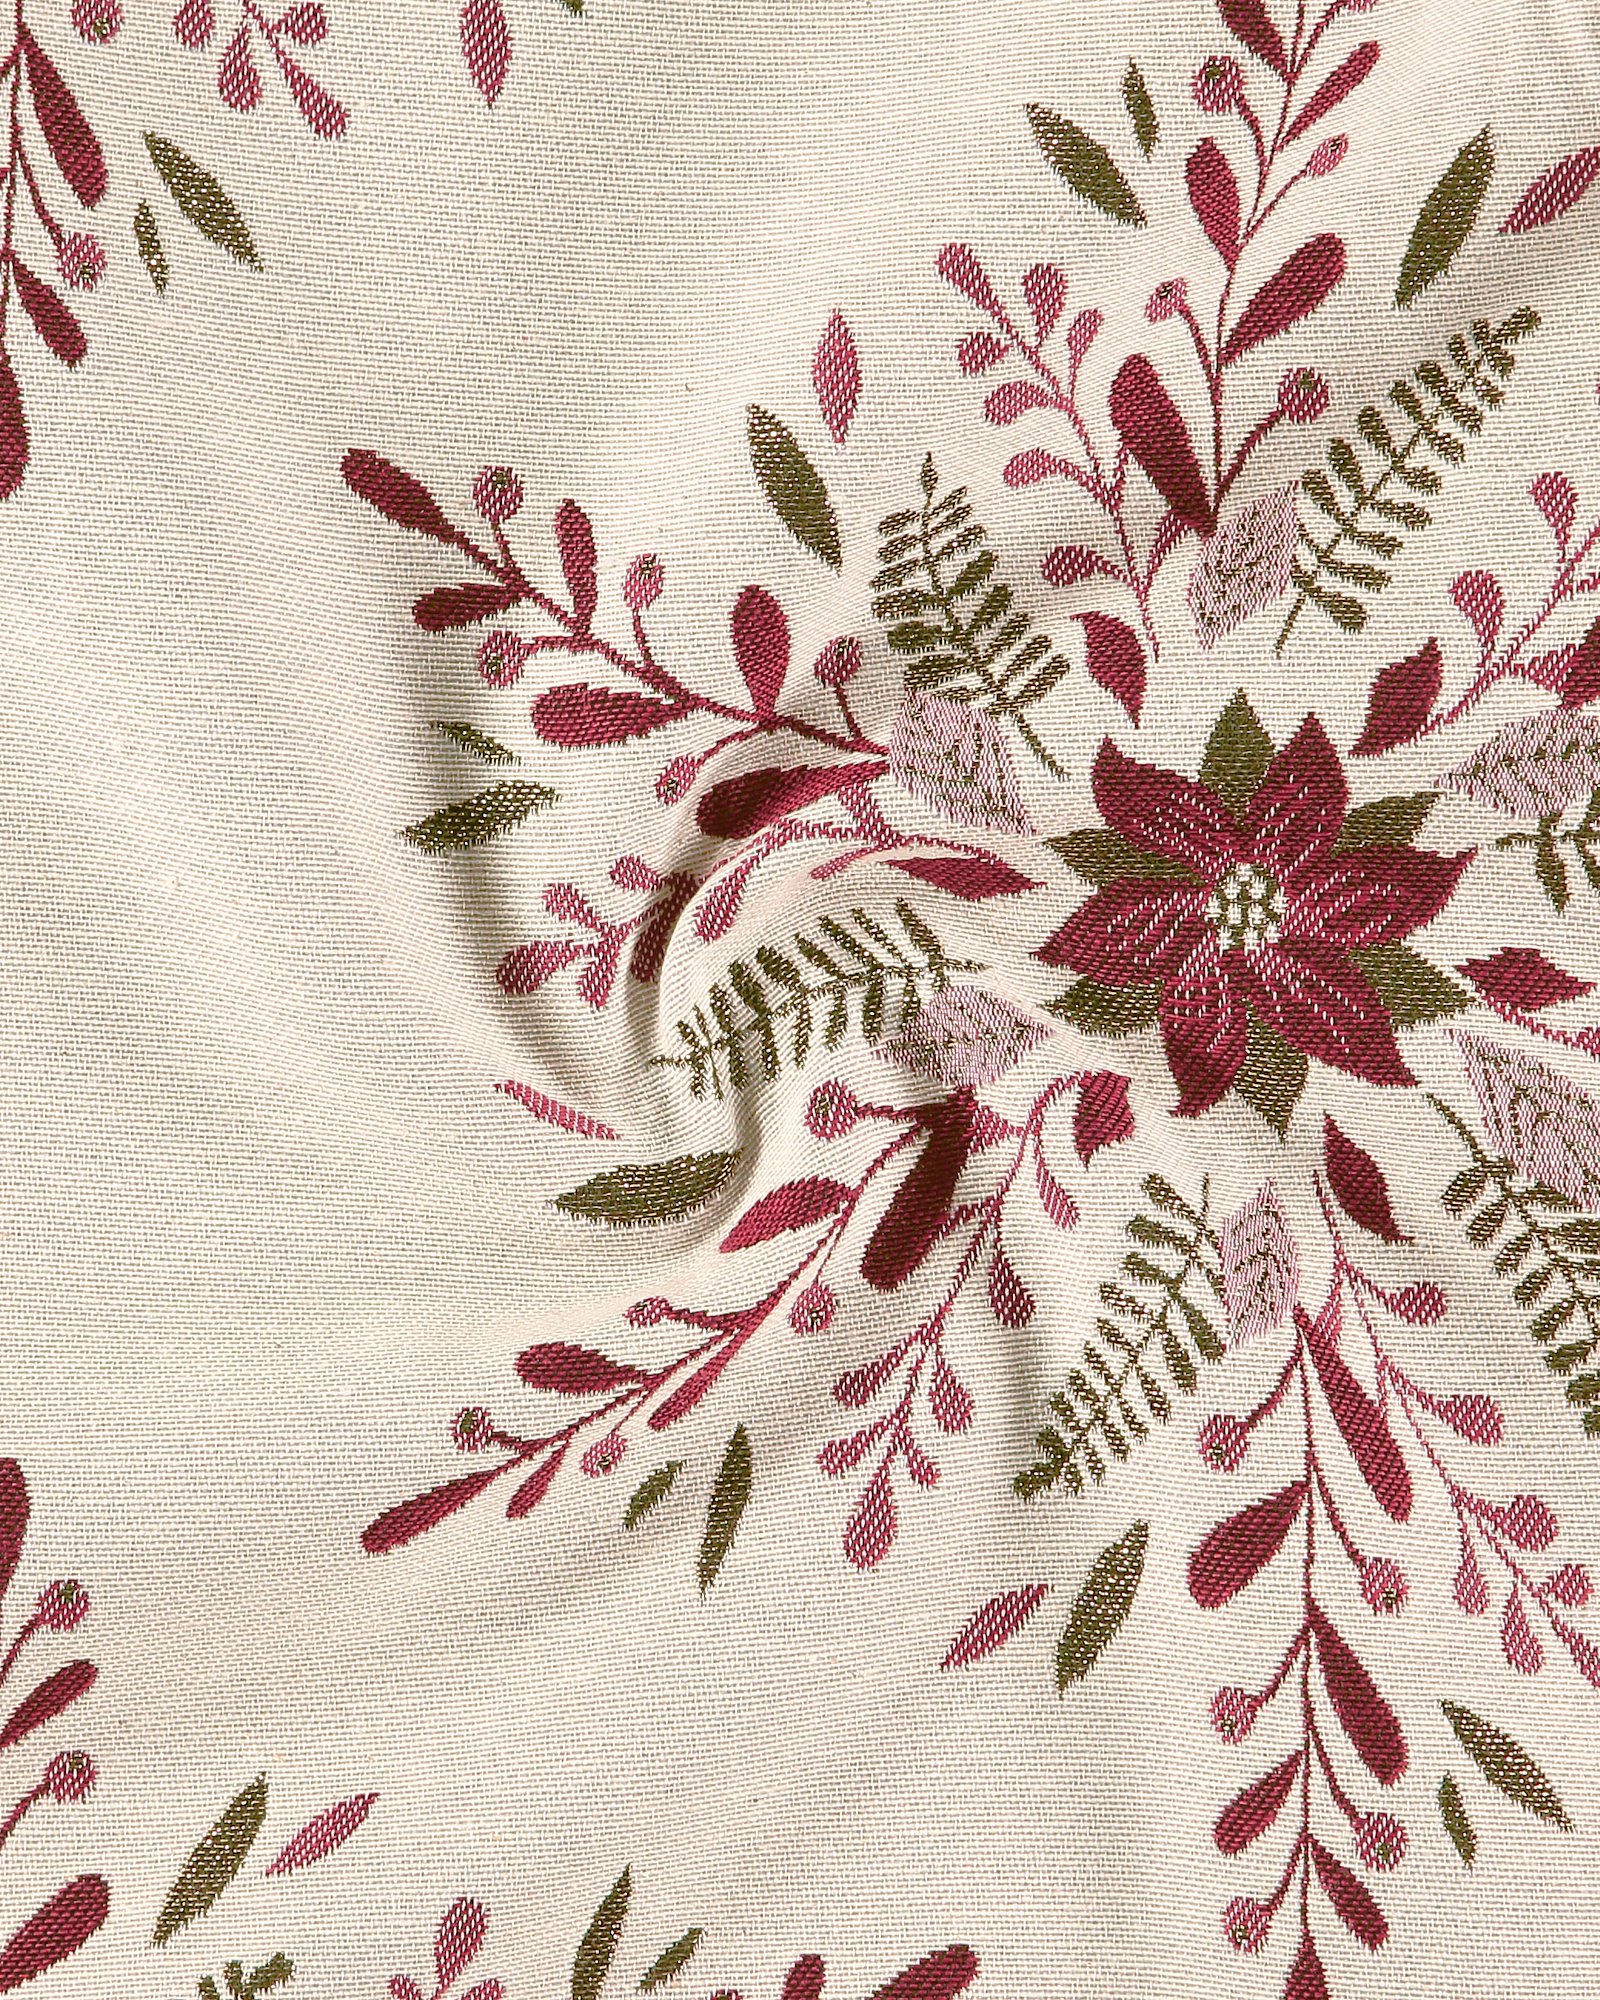 Jacquard offw w gold col/bordeaux flower 824162_pack